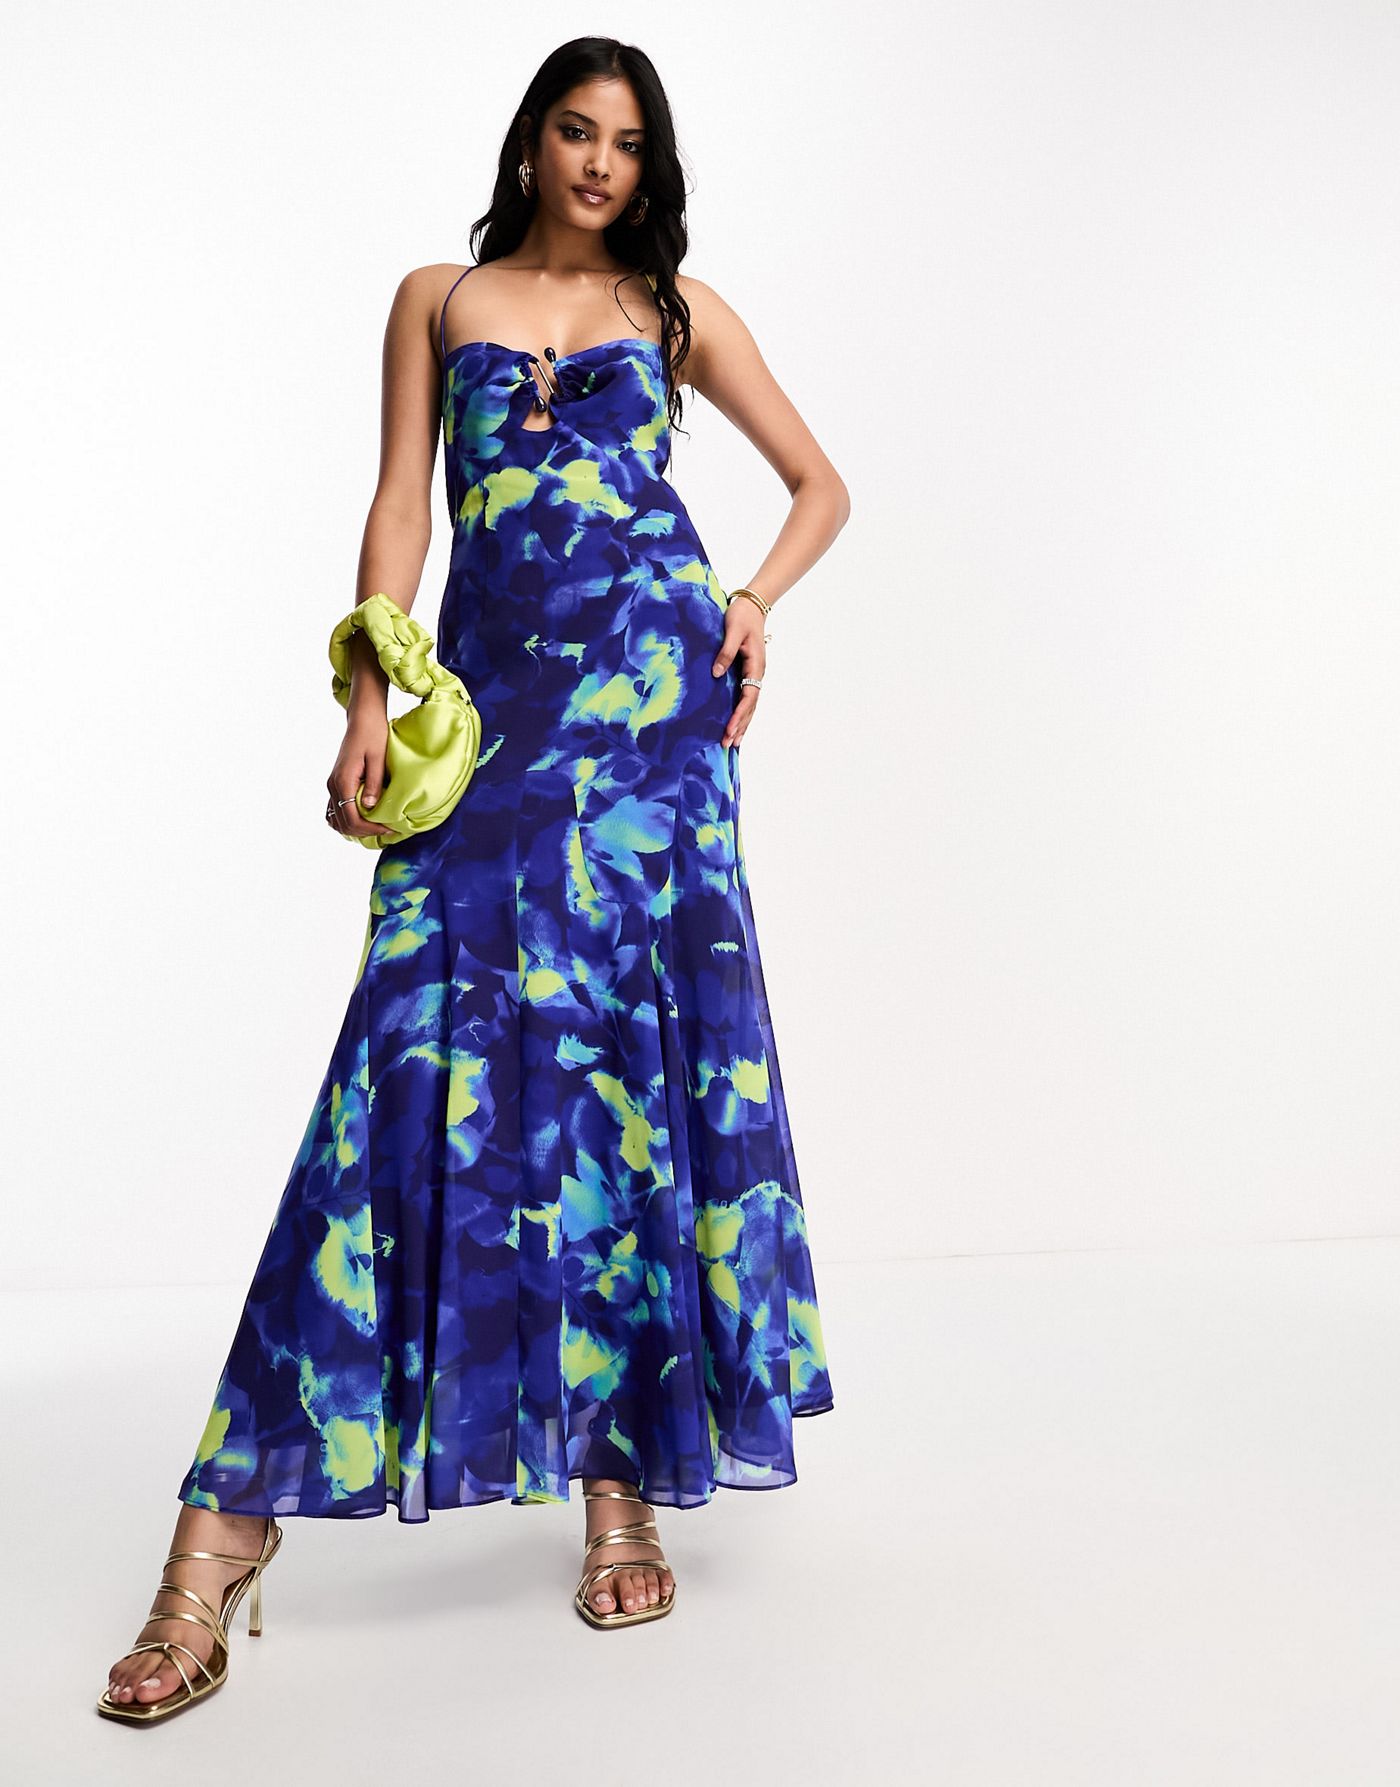 ASOS DESIGN halter midi dress with stone buckle detail in blue watercolour print